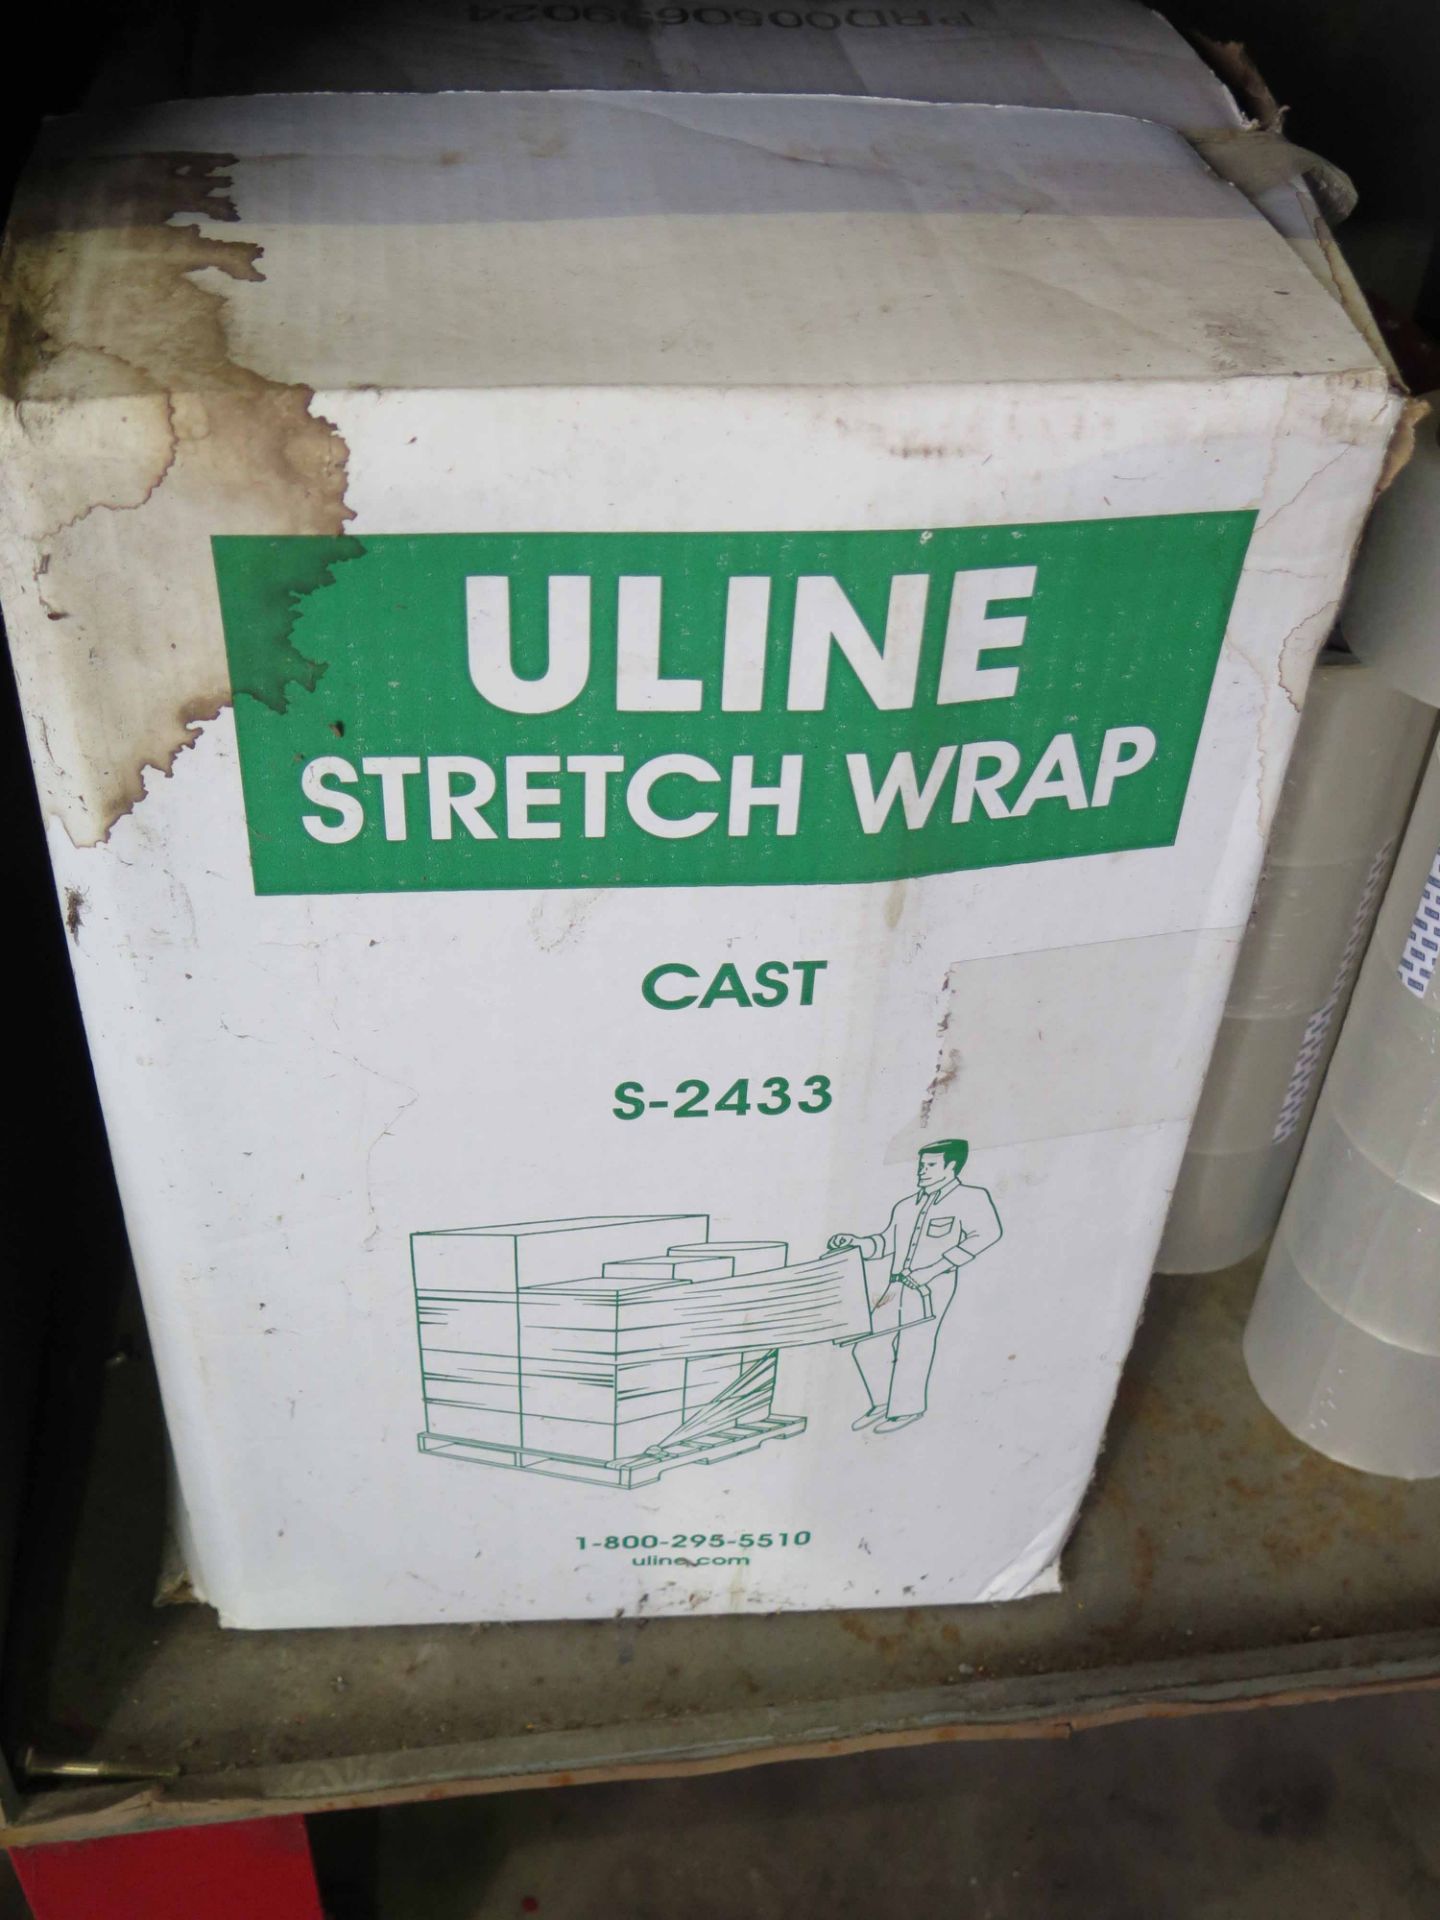 LOT CONSISTING OF: Uline 18" paper roll dispenser, plastic cable ties, rolls of shrink wrap,